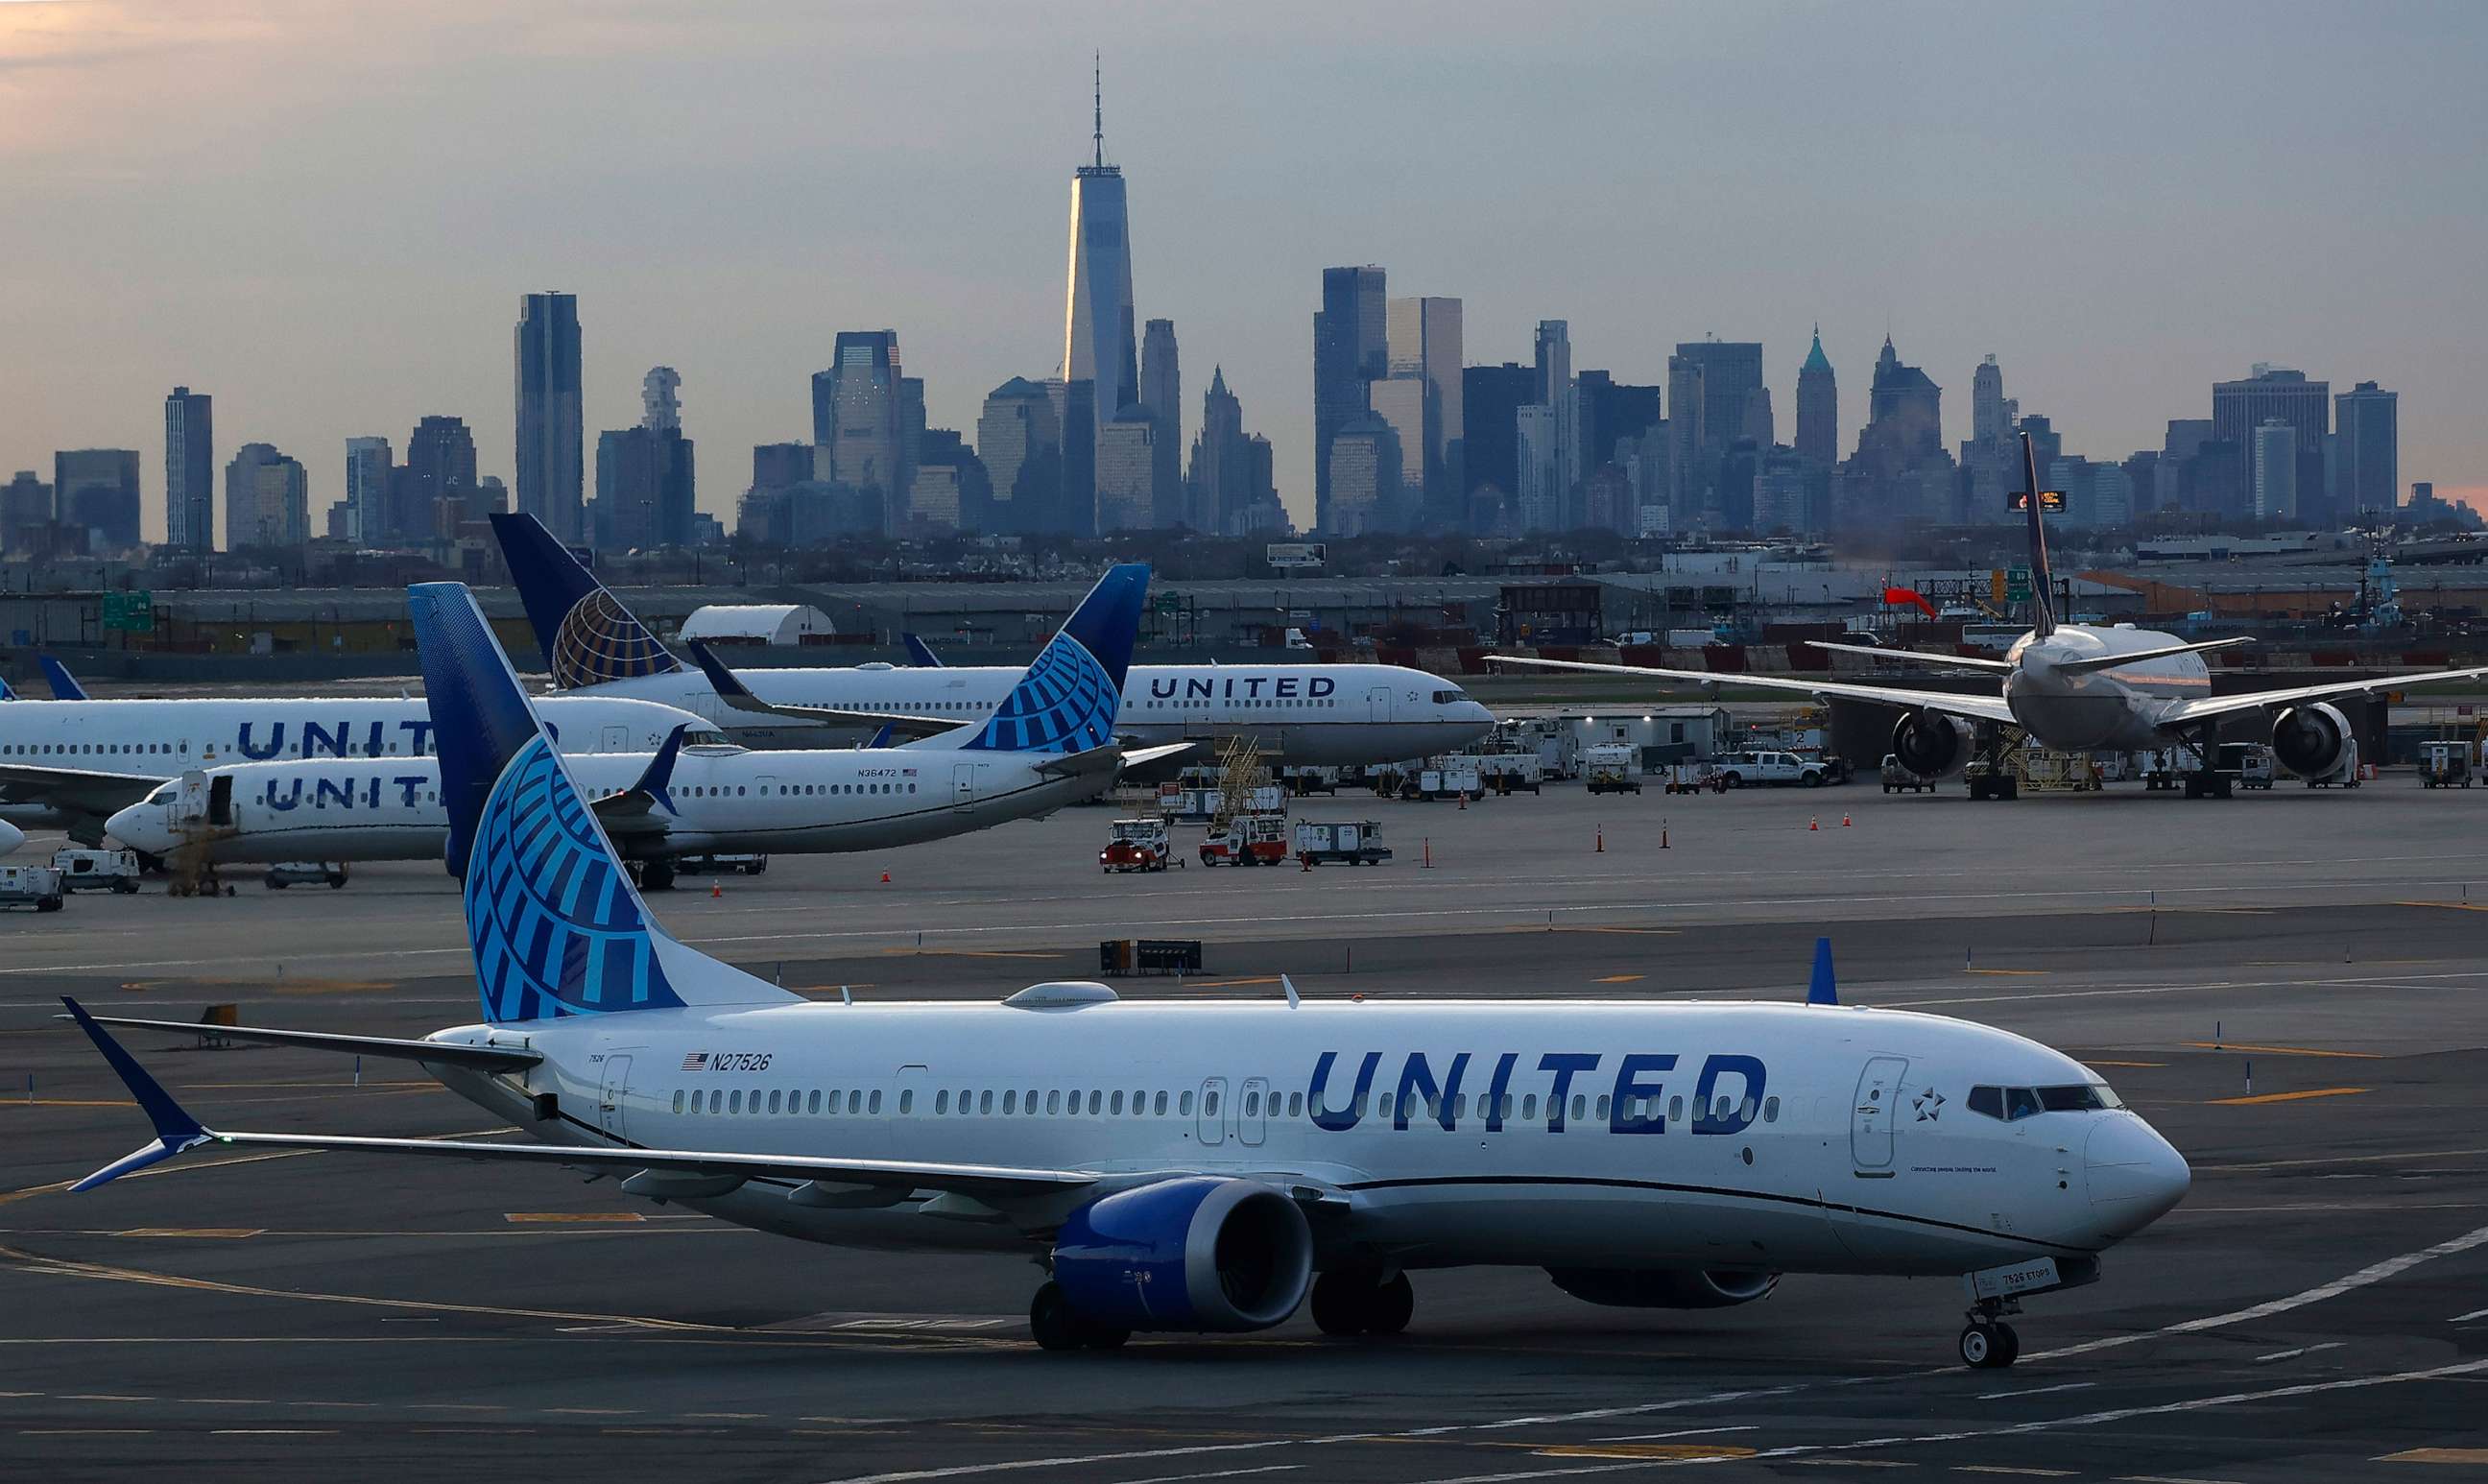 PHOTO: A United Airlines airplane makes its way to a gate in front of the skyline of lower Manhattan at Newark Liberty Airport, April 8, 2023, in Newark, N.J.